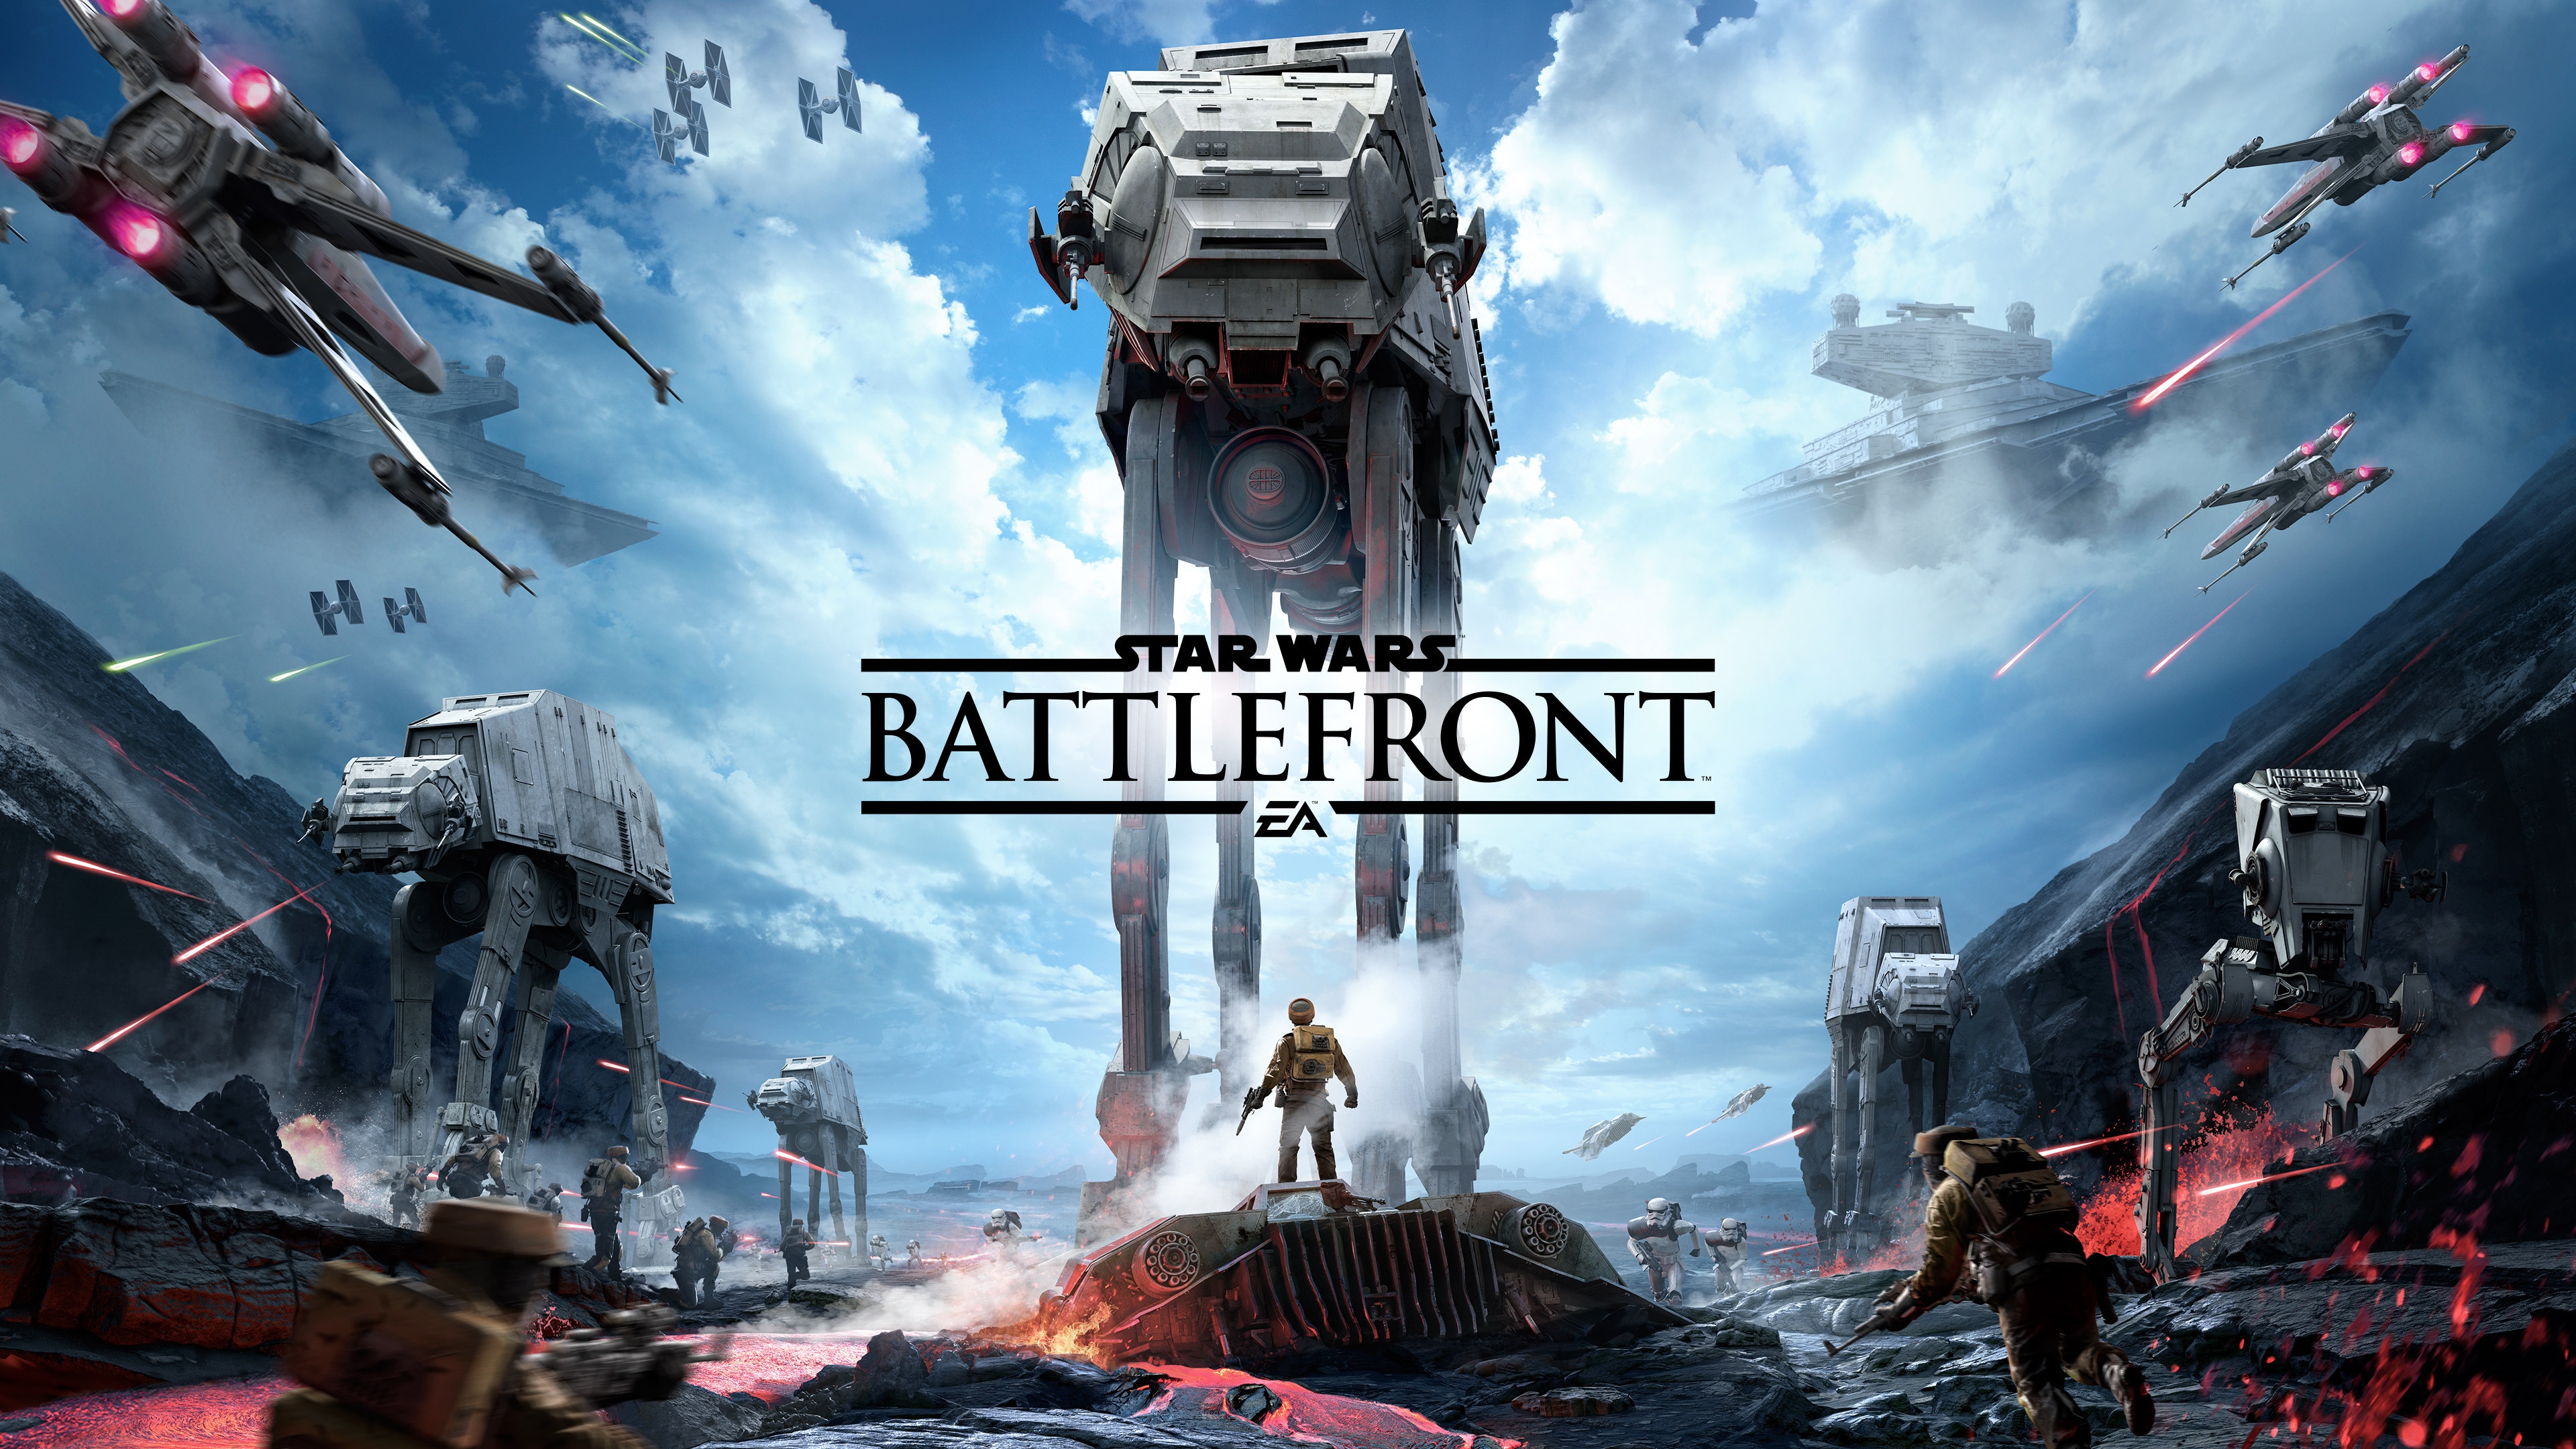 Star Wars Battlefront Poster for 3840 x 2160 Ultra HD resolution